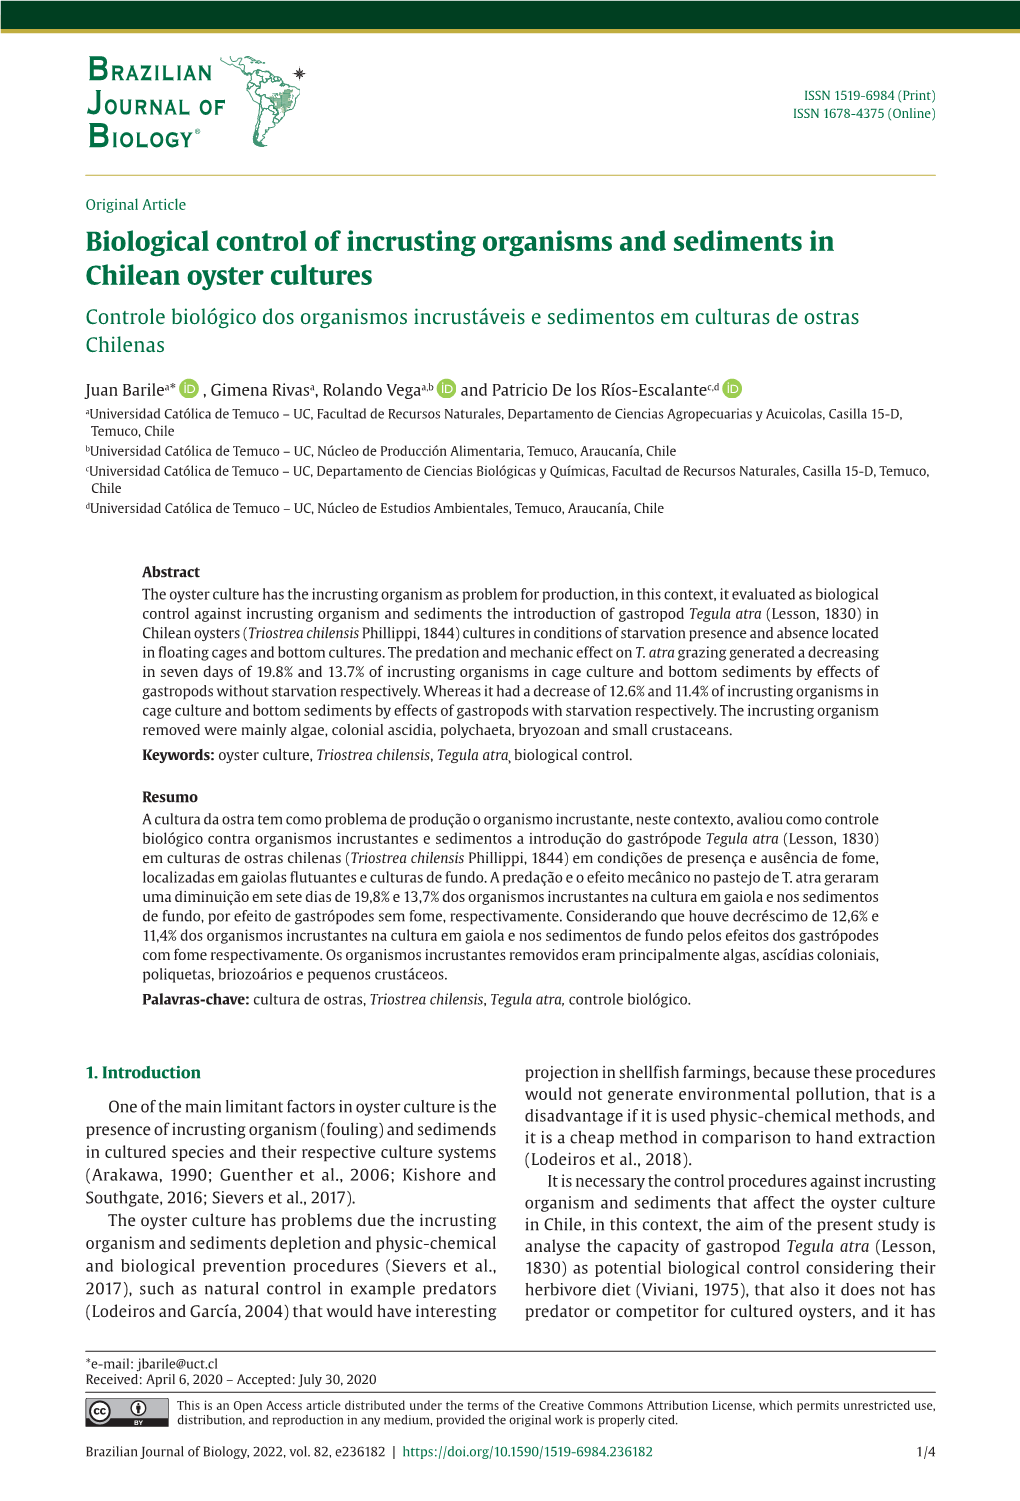 Biological Control of Incrusting Organisms and Sediments in Chilean Oyster Cultures